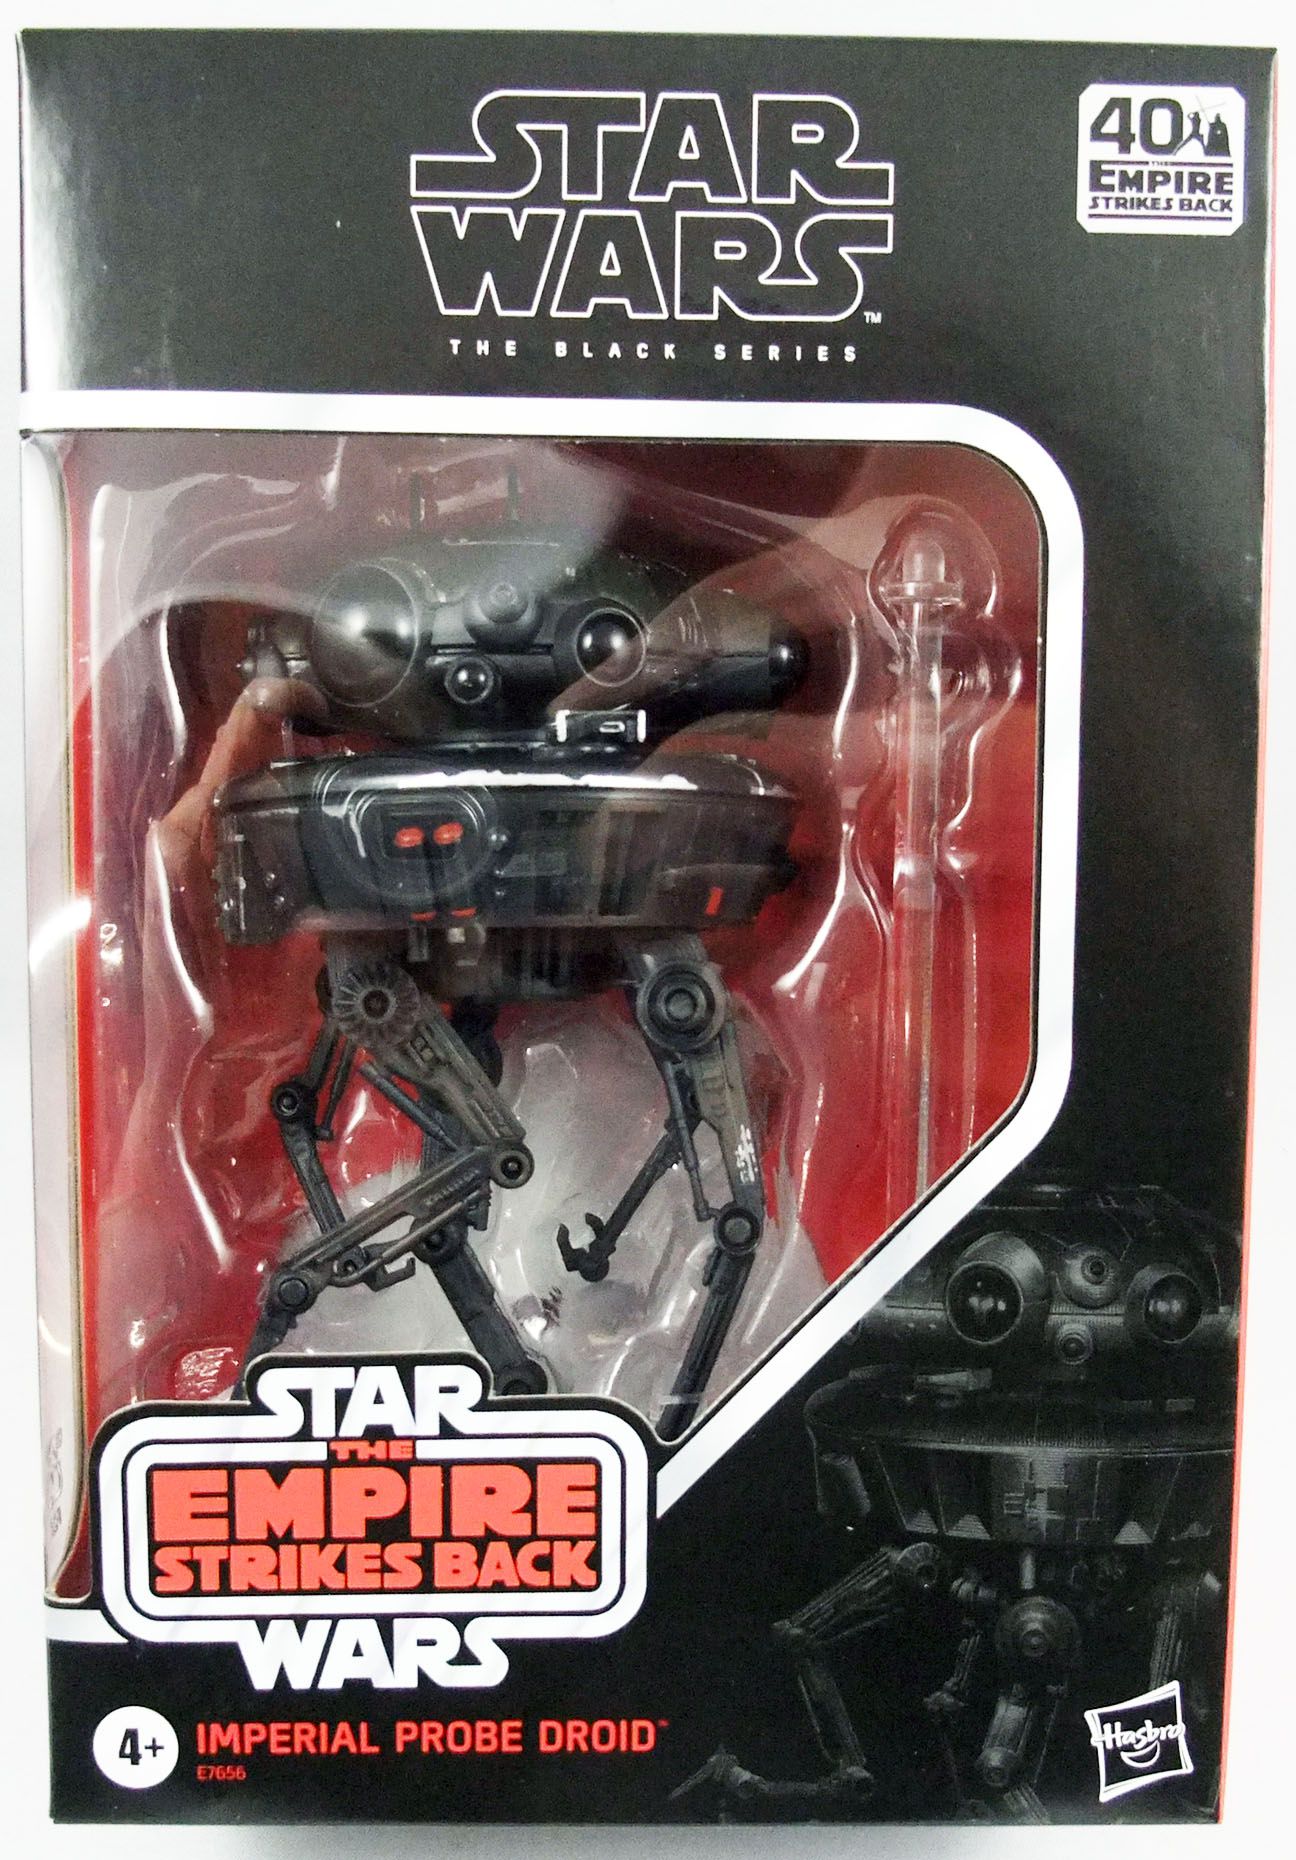 Star Wars Black Series 6 Inch Deluxe Action Figure Imperial Probe Droid D3 ESB 